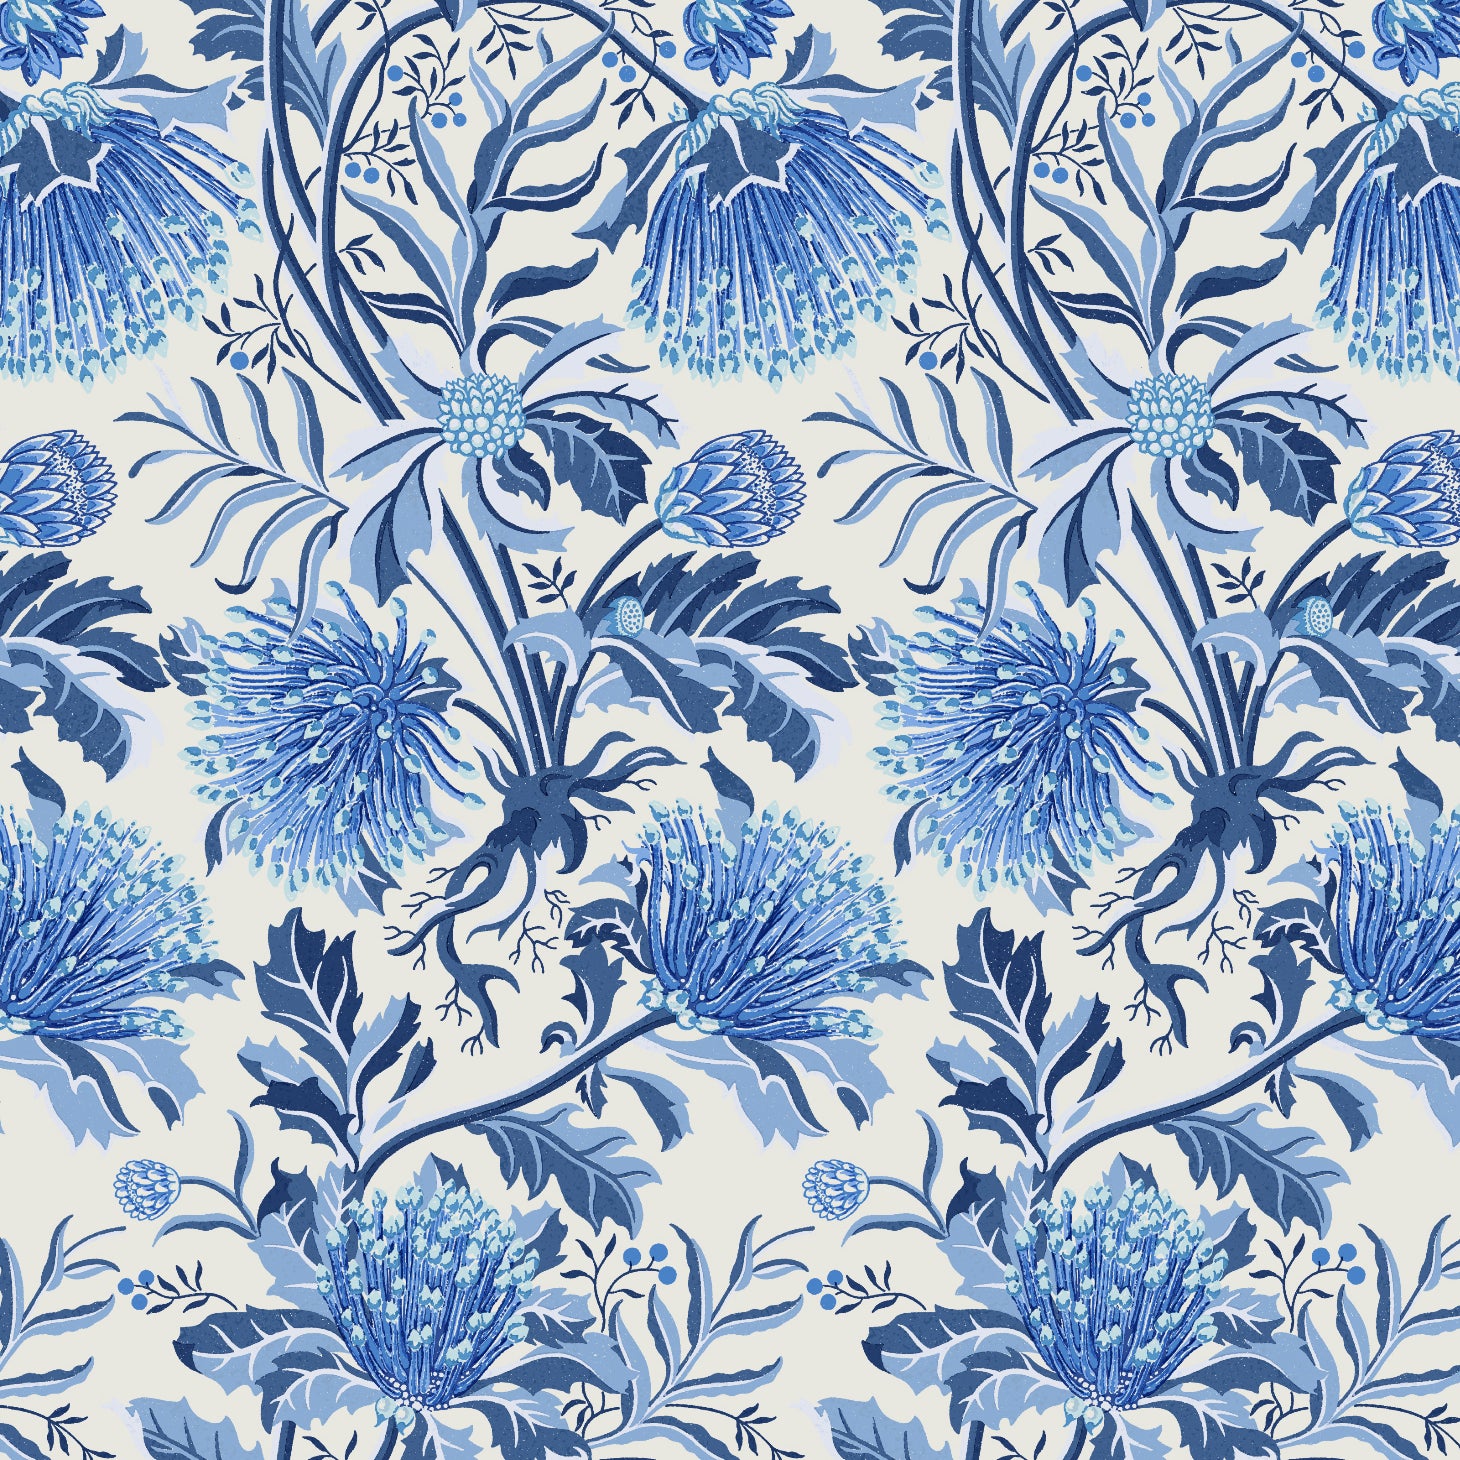 Detail of wallpaper in a dense floral print in shades of blue and navy on a white field.